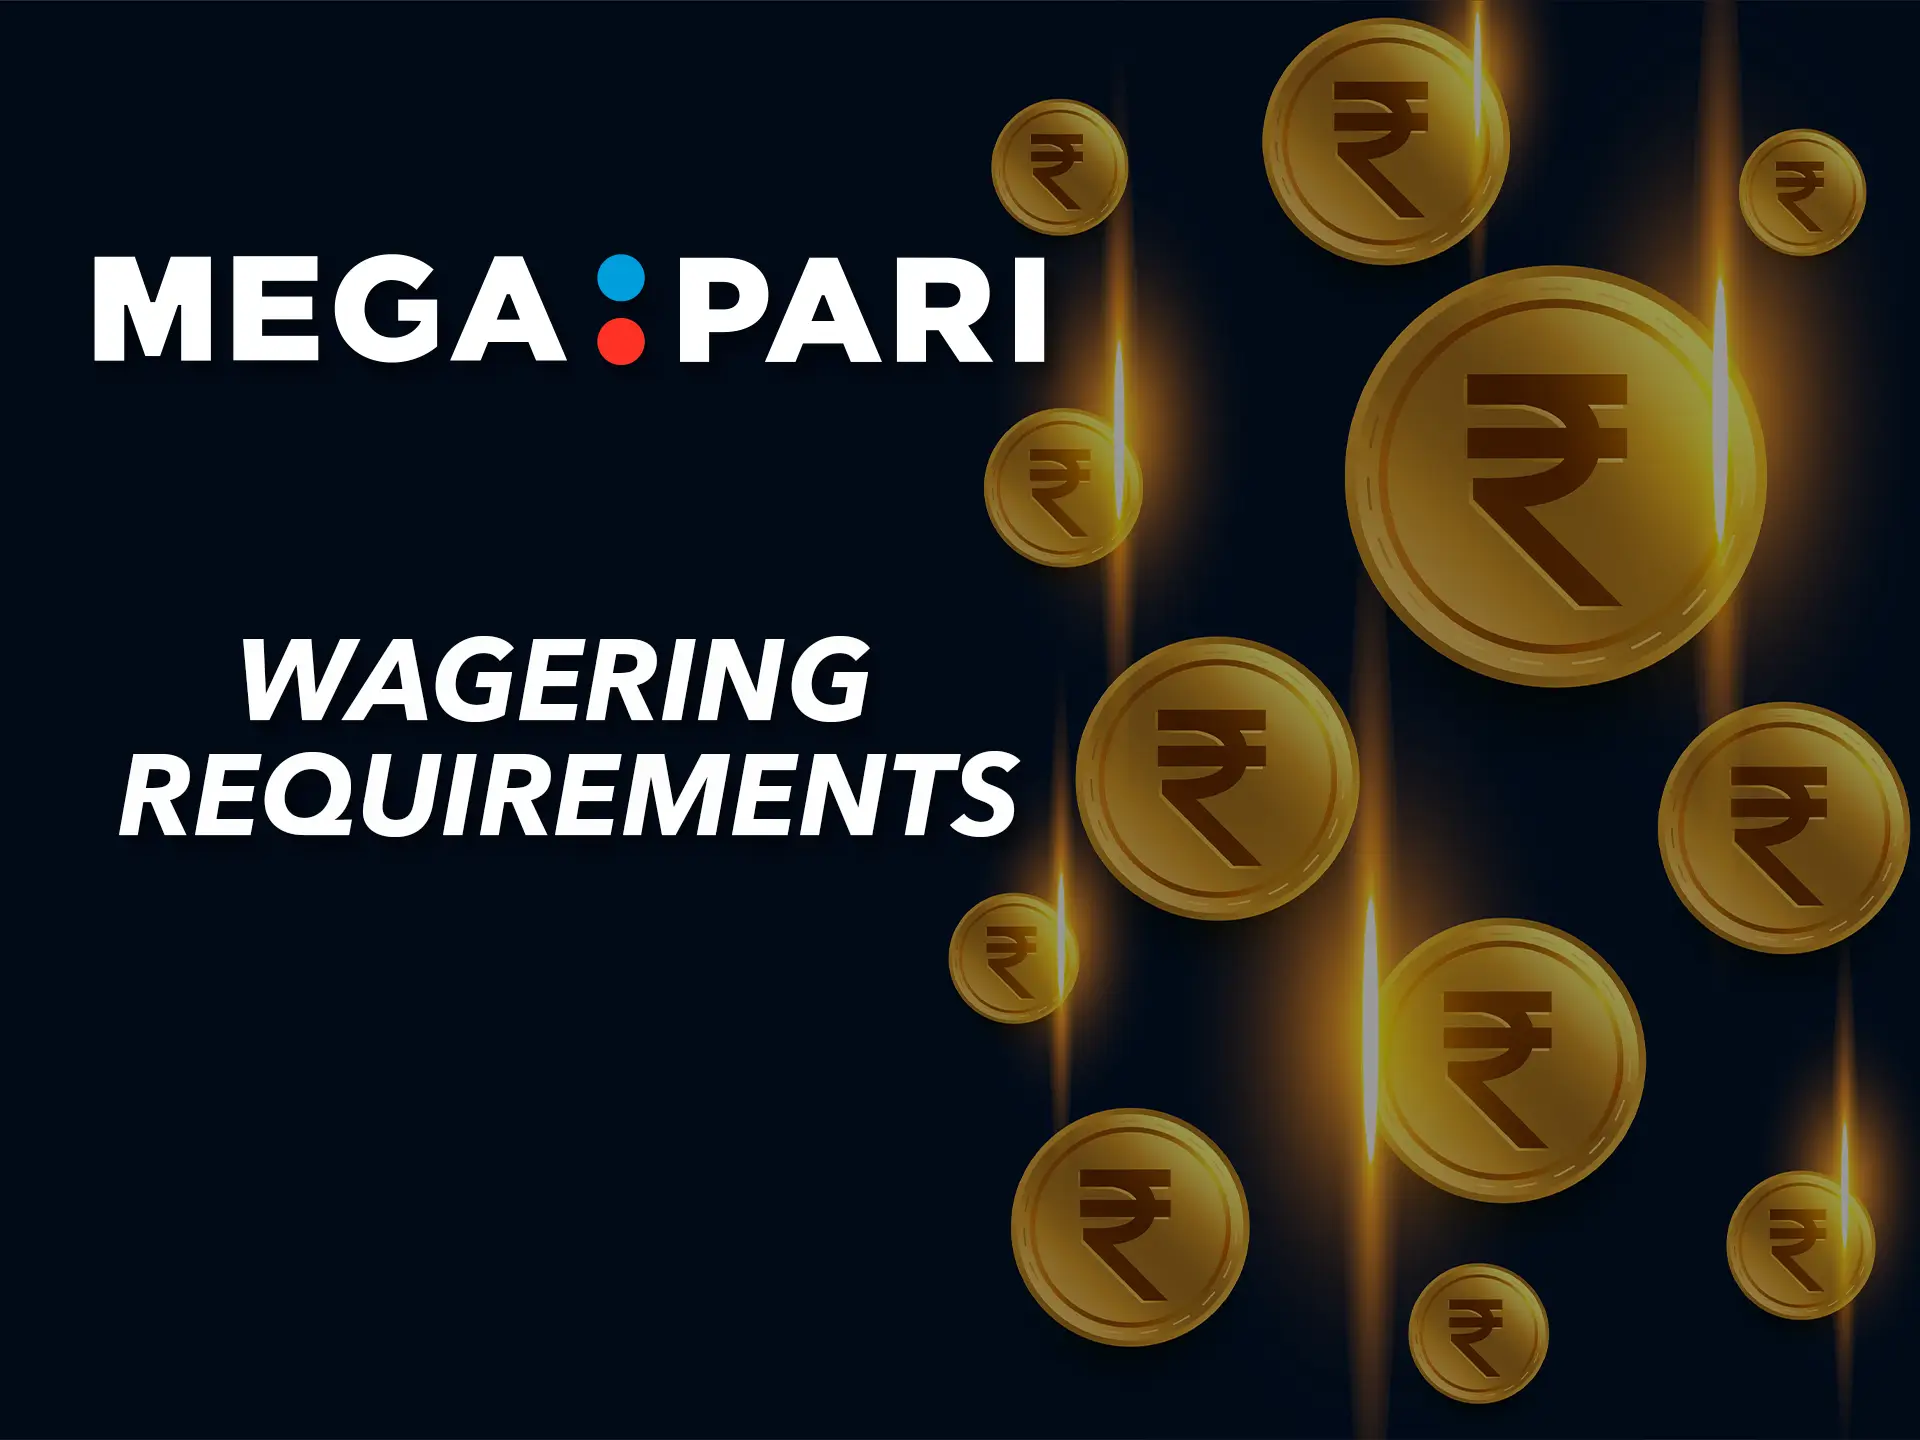 Recoup your winnings at Megapari and easily withdraw them to your account.